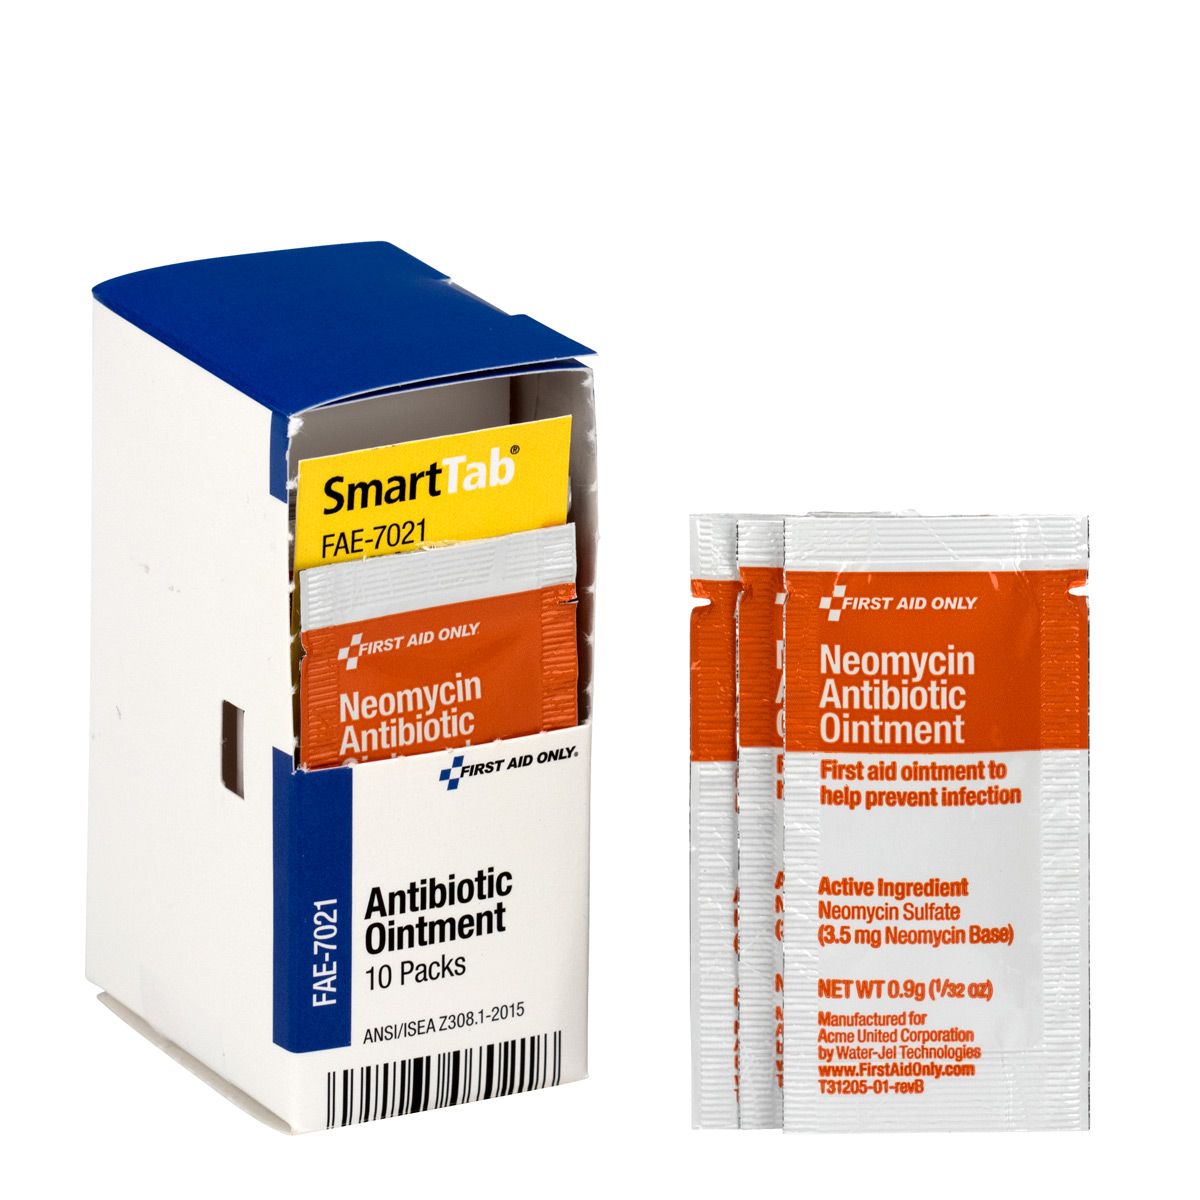 First Aid Only SmartCompliance Refill Antibiotic Ointment, 10 Per Box from Columbia Safety